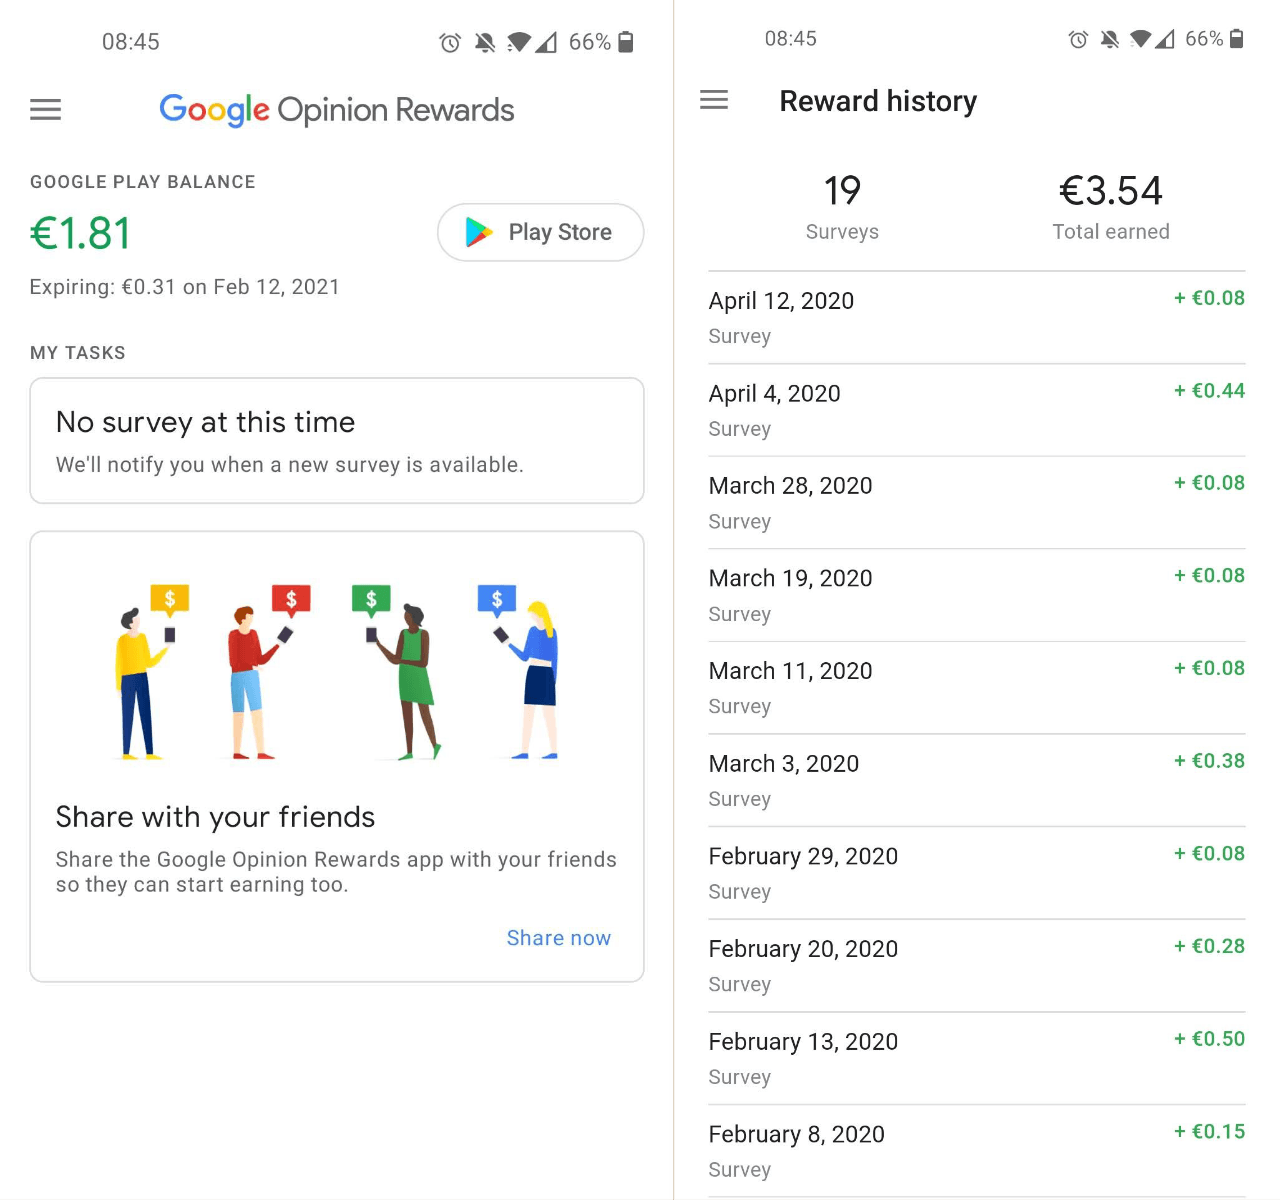 google opinion rewards expands to more